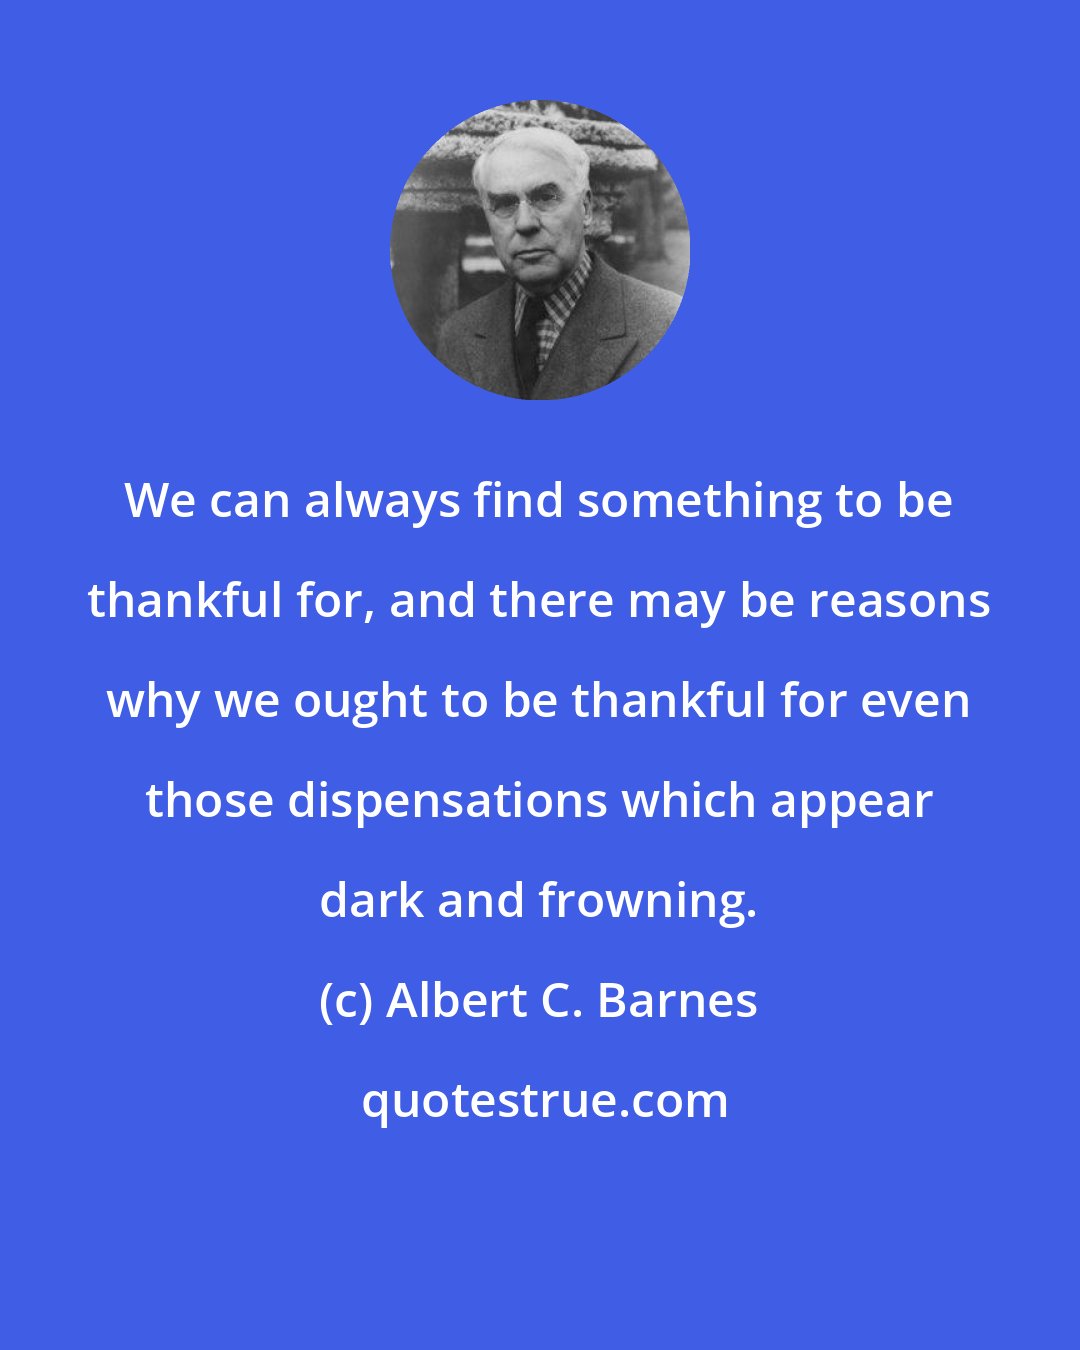 Albert C. Barnes: We can always find something to be thankful for, and there may be reasons why we ought to be thankful for even those dispensations which appear dark and frowning.